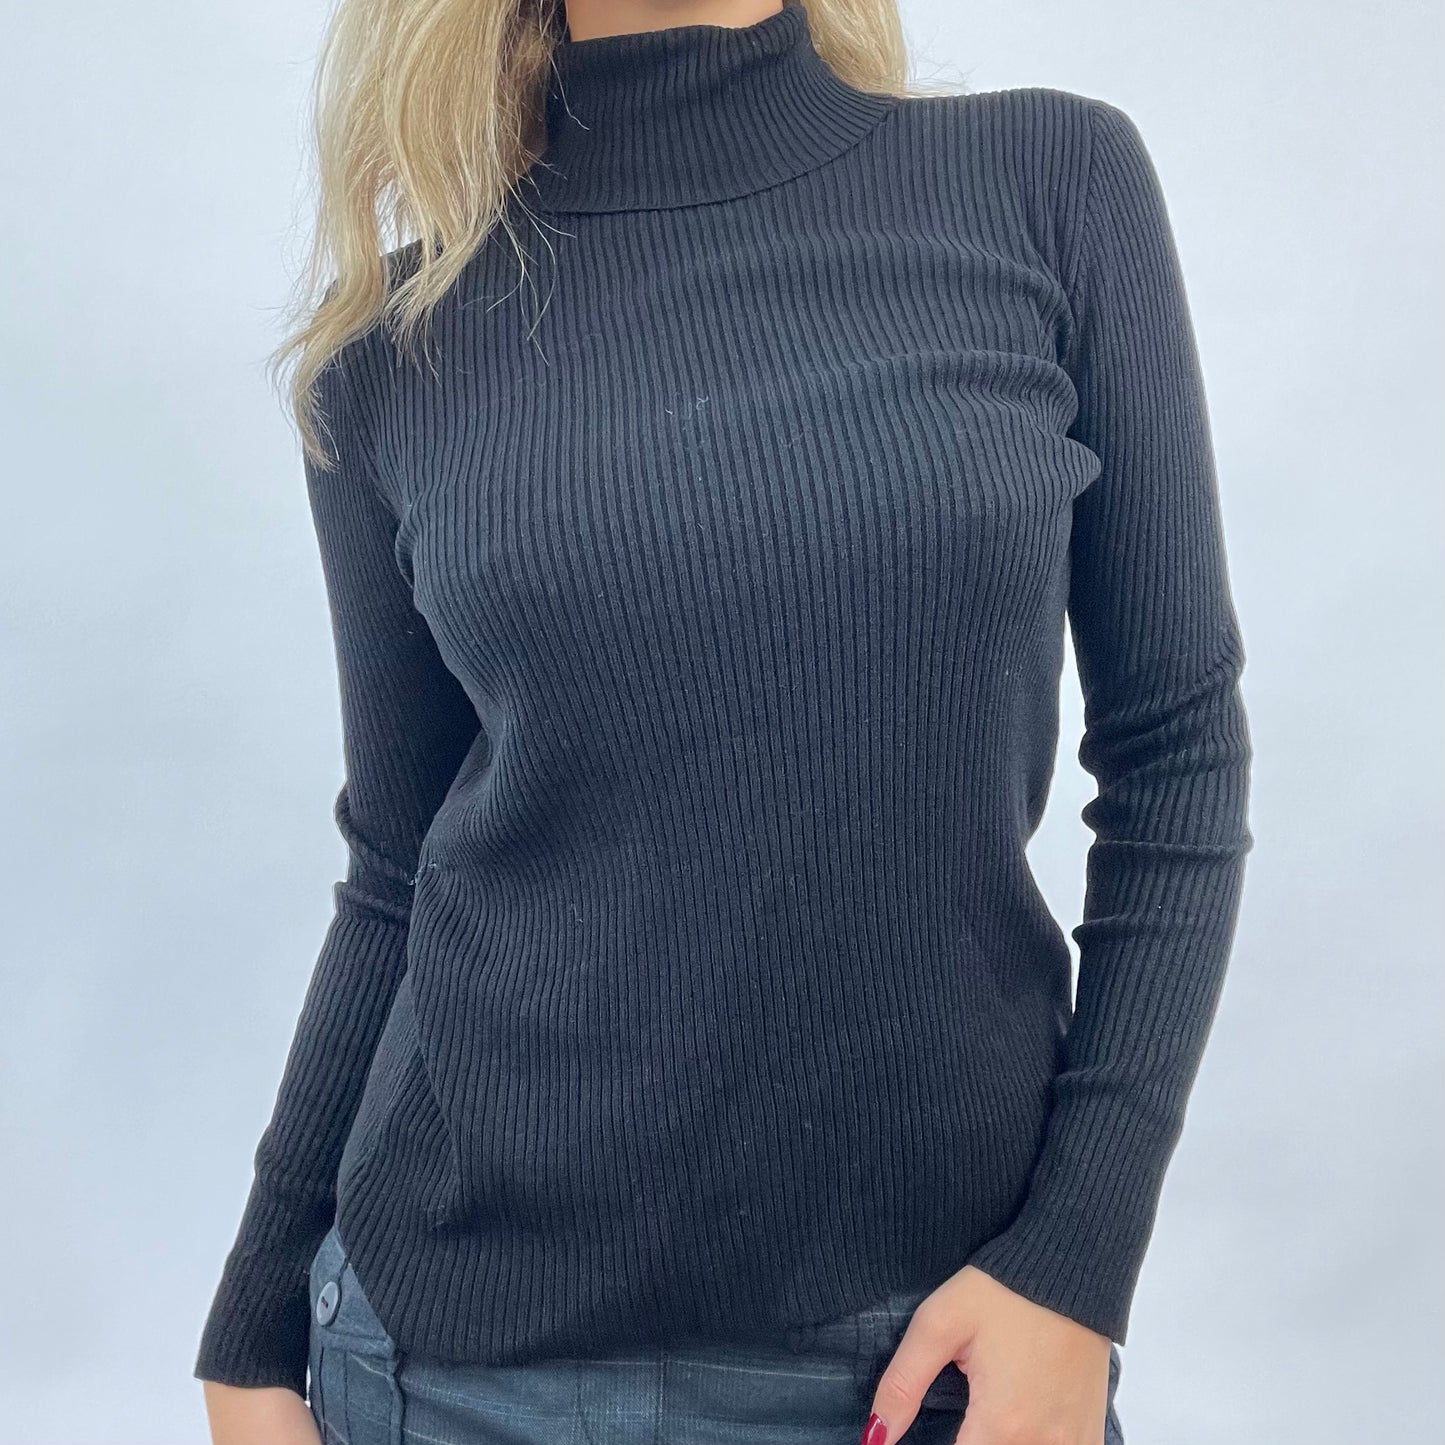 CORPCORE DROP | small black ribbed knit turtleneck jumper